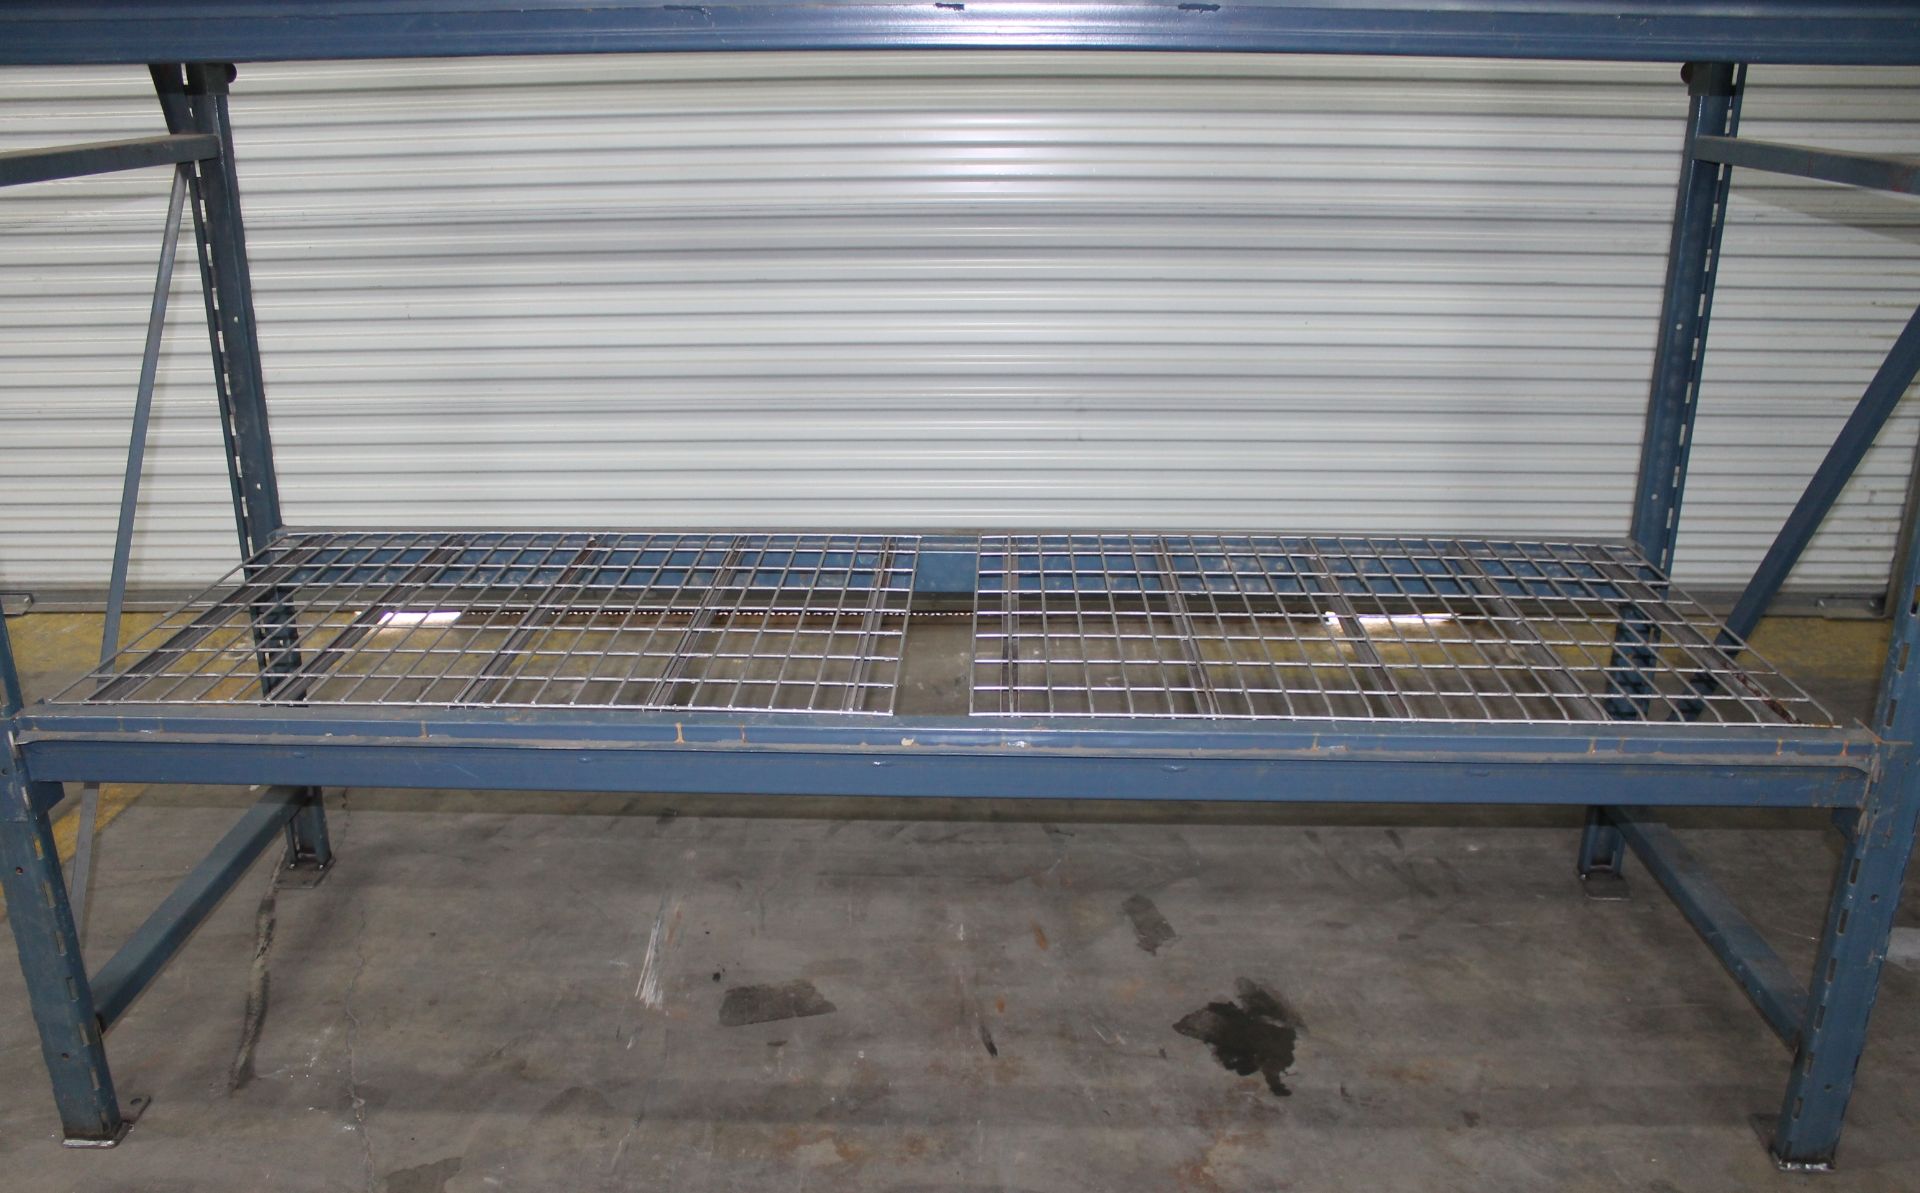 96"H X 36"D X 96"L STOCK ROOM SHELVING, TOTAL 10 SECTIONS WITH 2 BEAM LEVELS EACH,  INCLUDES - Image 2 of 5